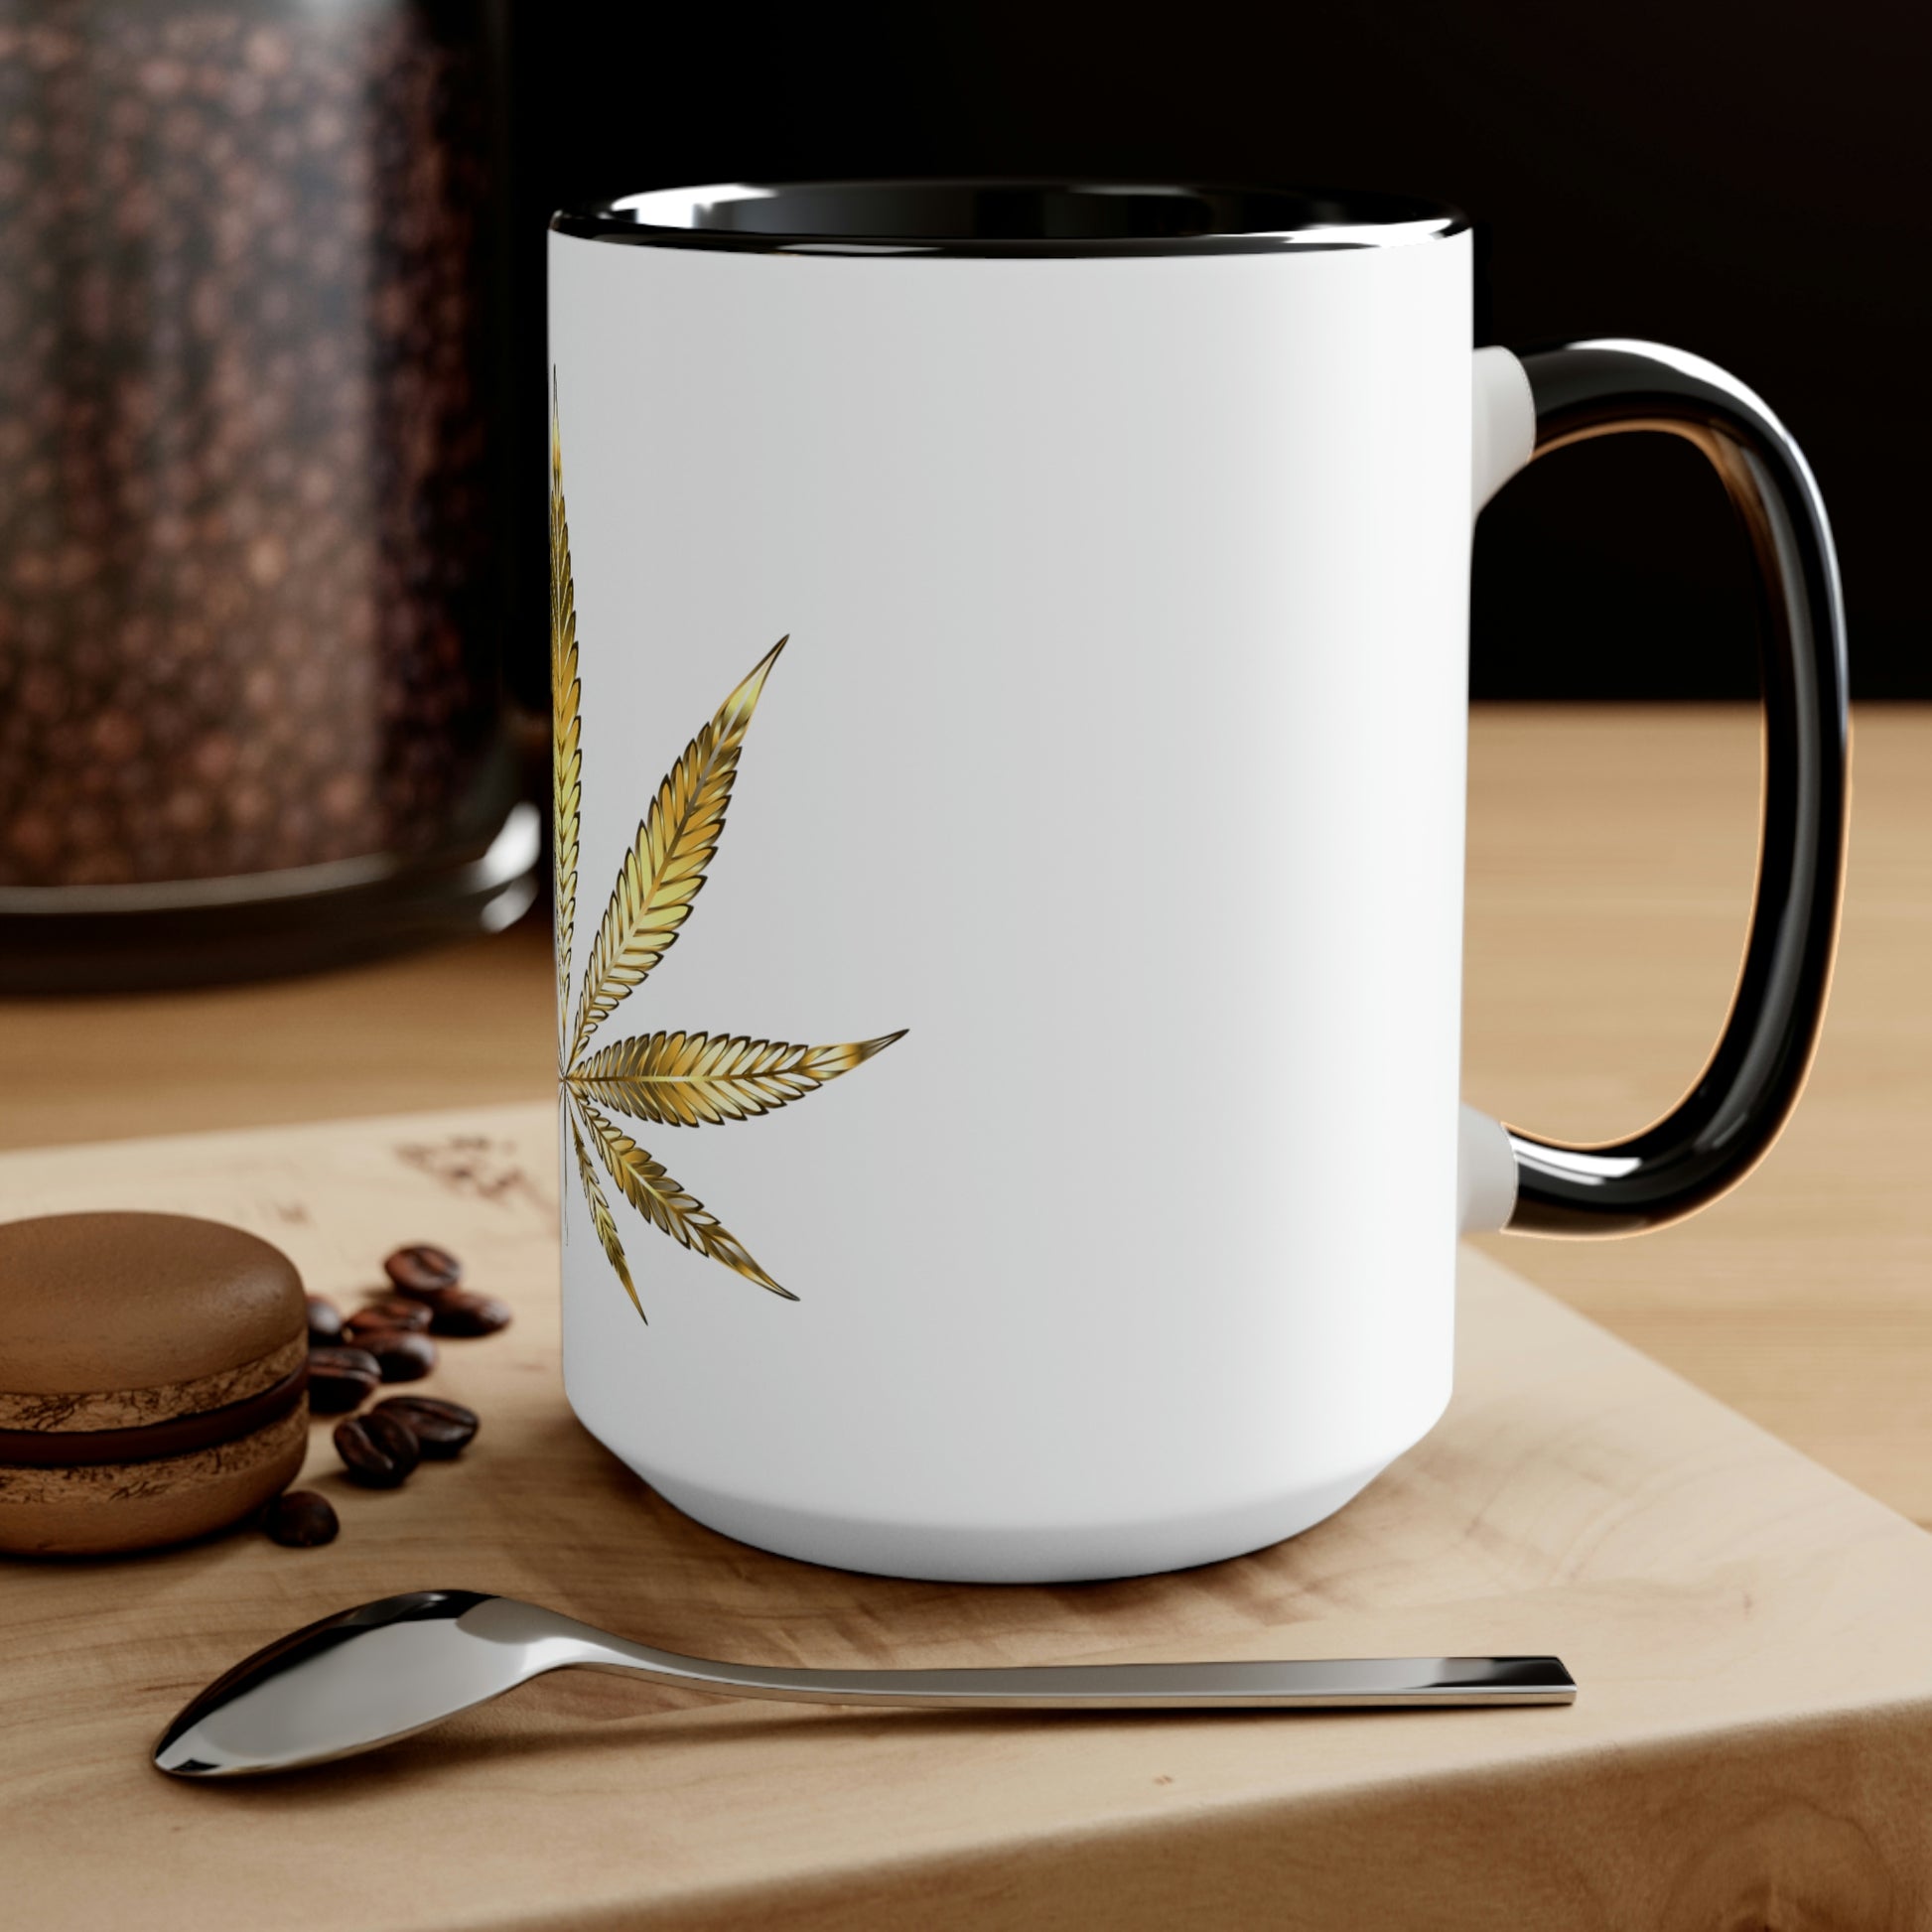 A white cannabis mug with a black interior featuring a bright gold weed leaf on the front center, sitting on a wood base.